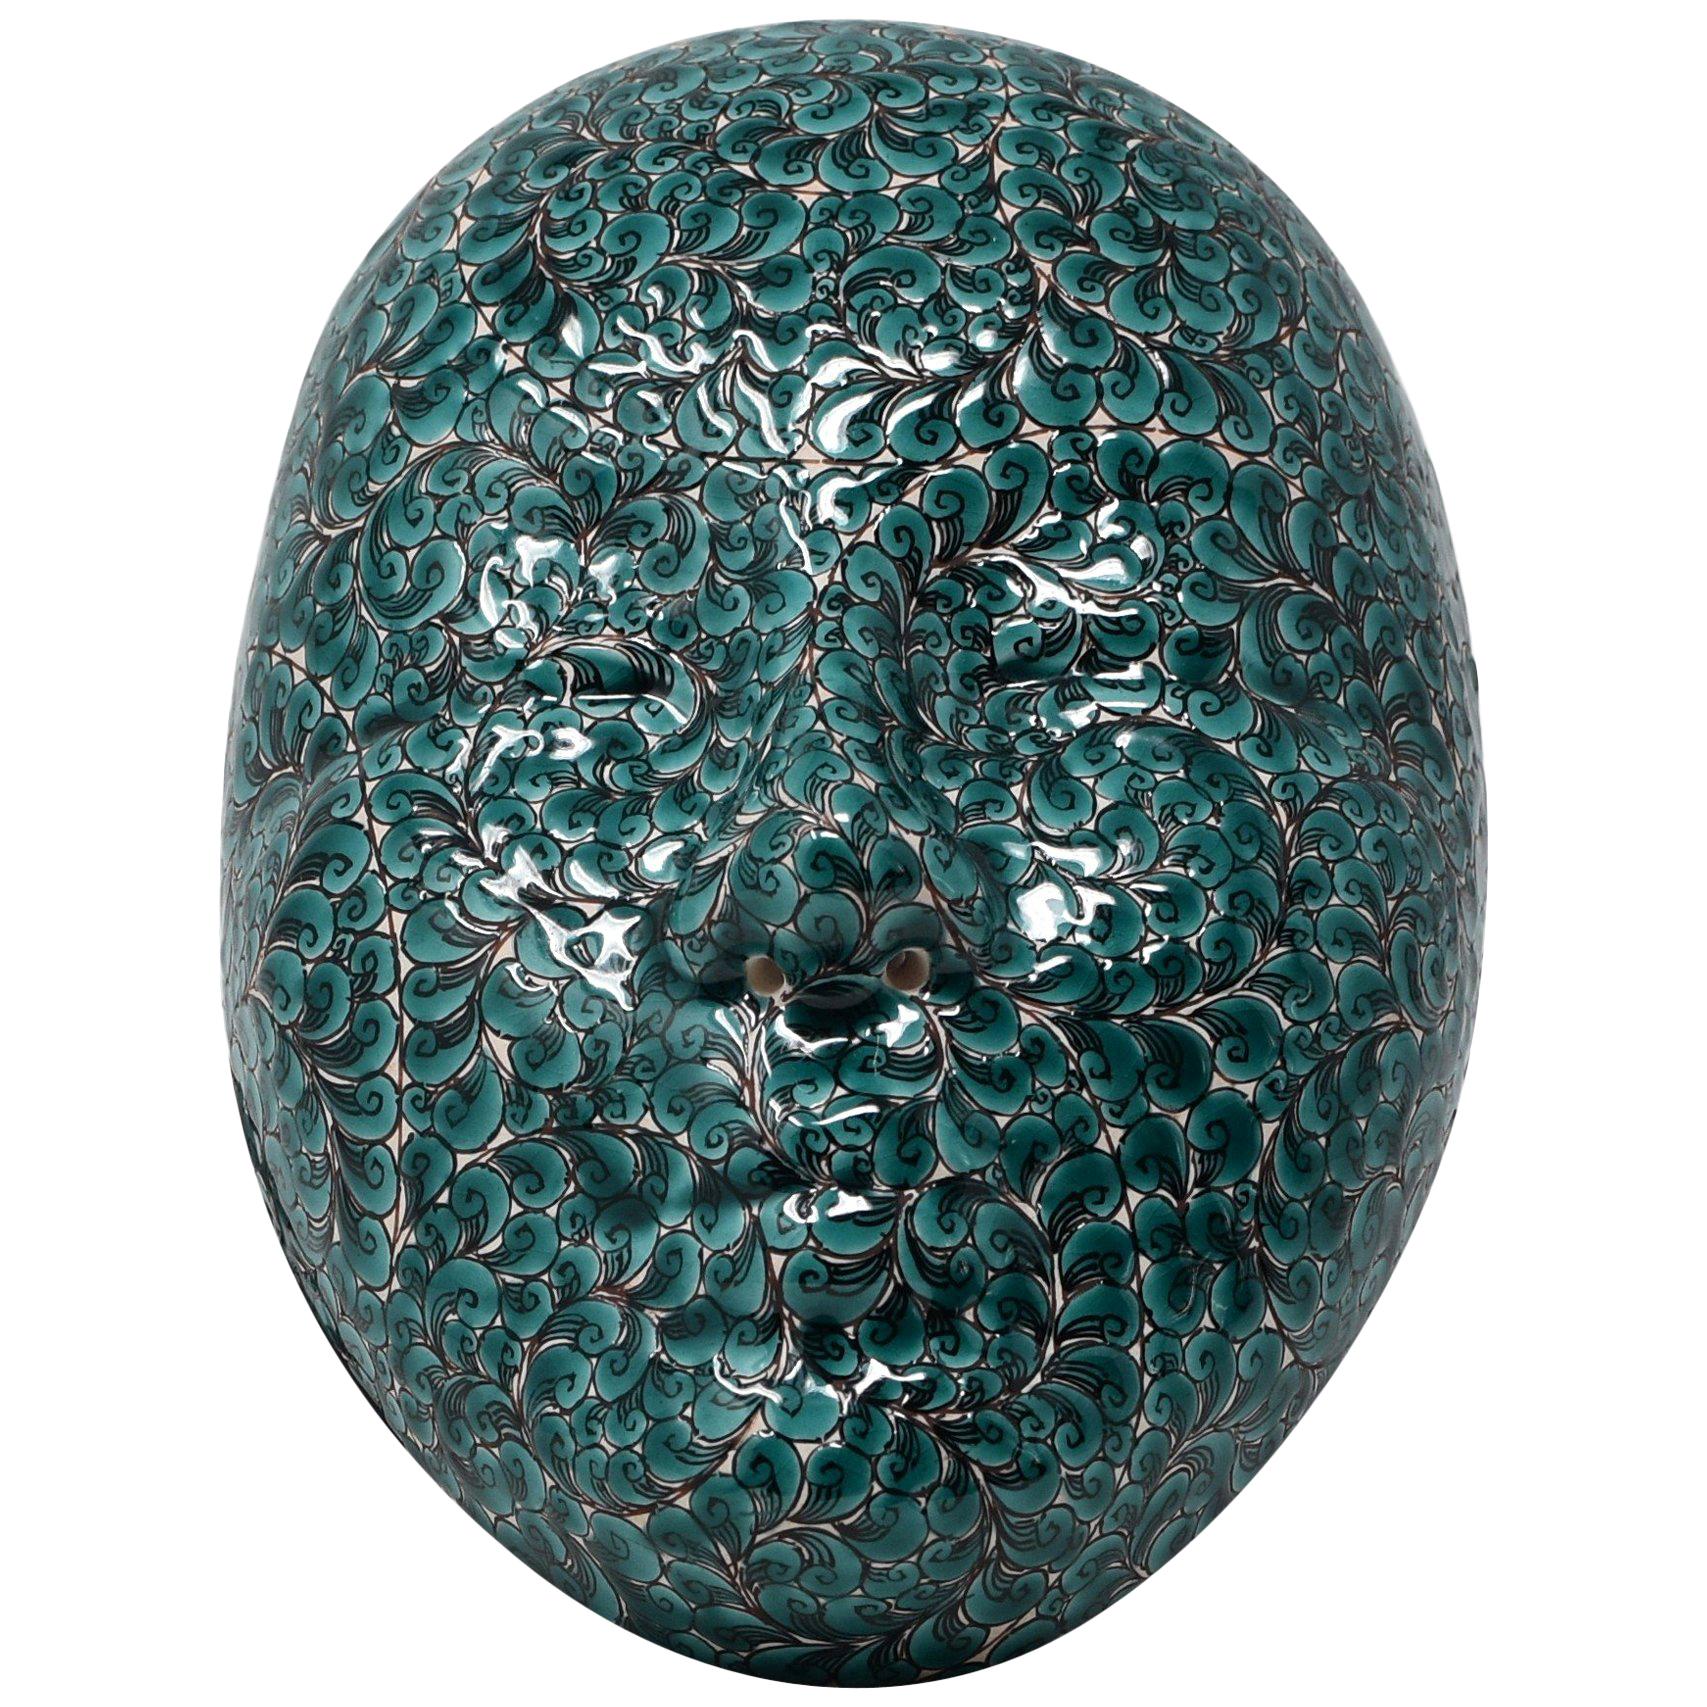 Japanese Contemporary Green Porcelain Mask by Master Artist For Sale